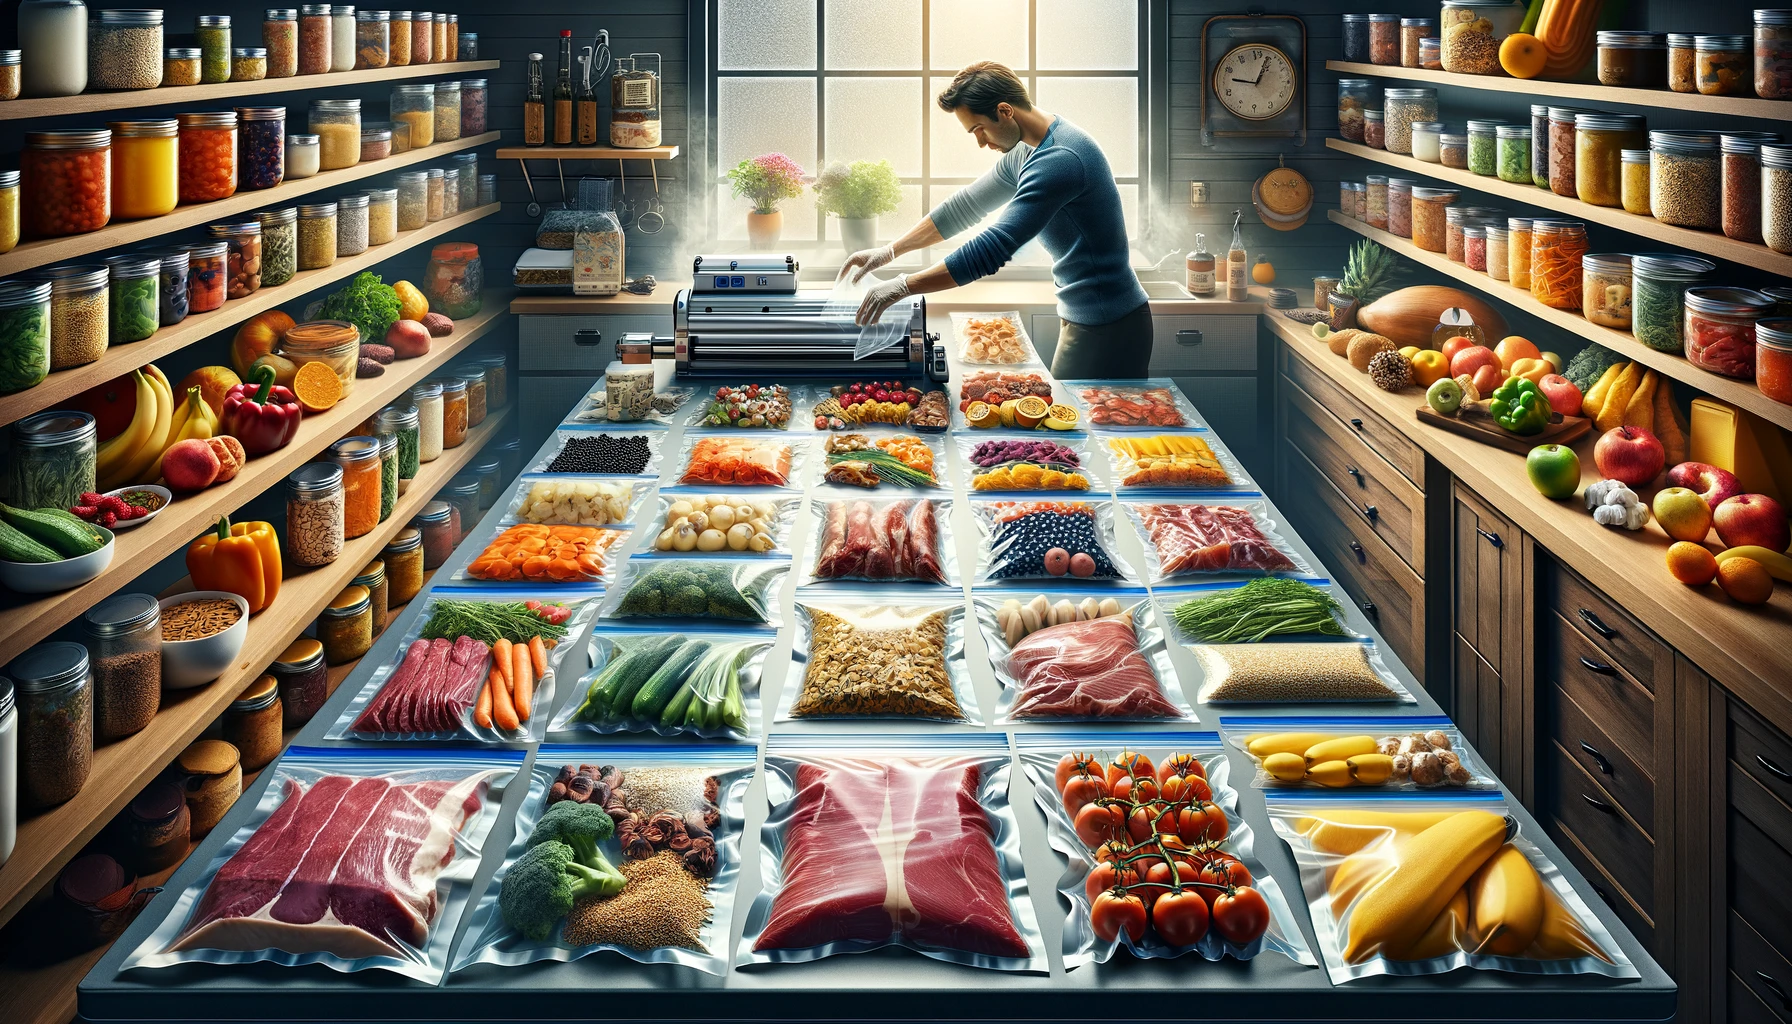 A kitchen scene showcasing a prepper preparing a wide variety of foods for vacuum sealing, including meats, fish, vegetables, fruits, and grains, highlighting the meticulous process of preservation to maximize freshness and extend shelf life